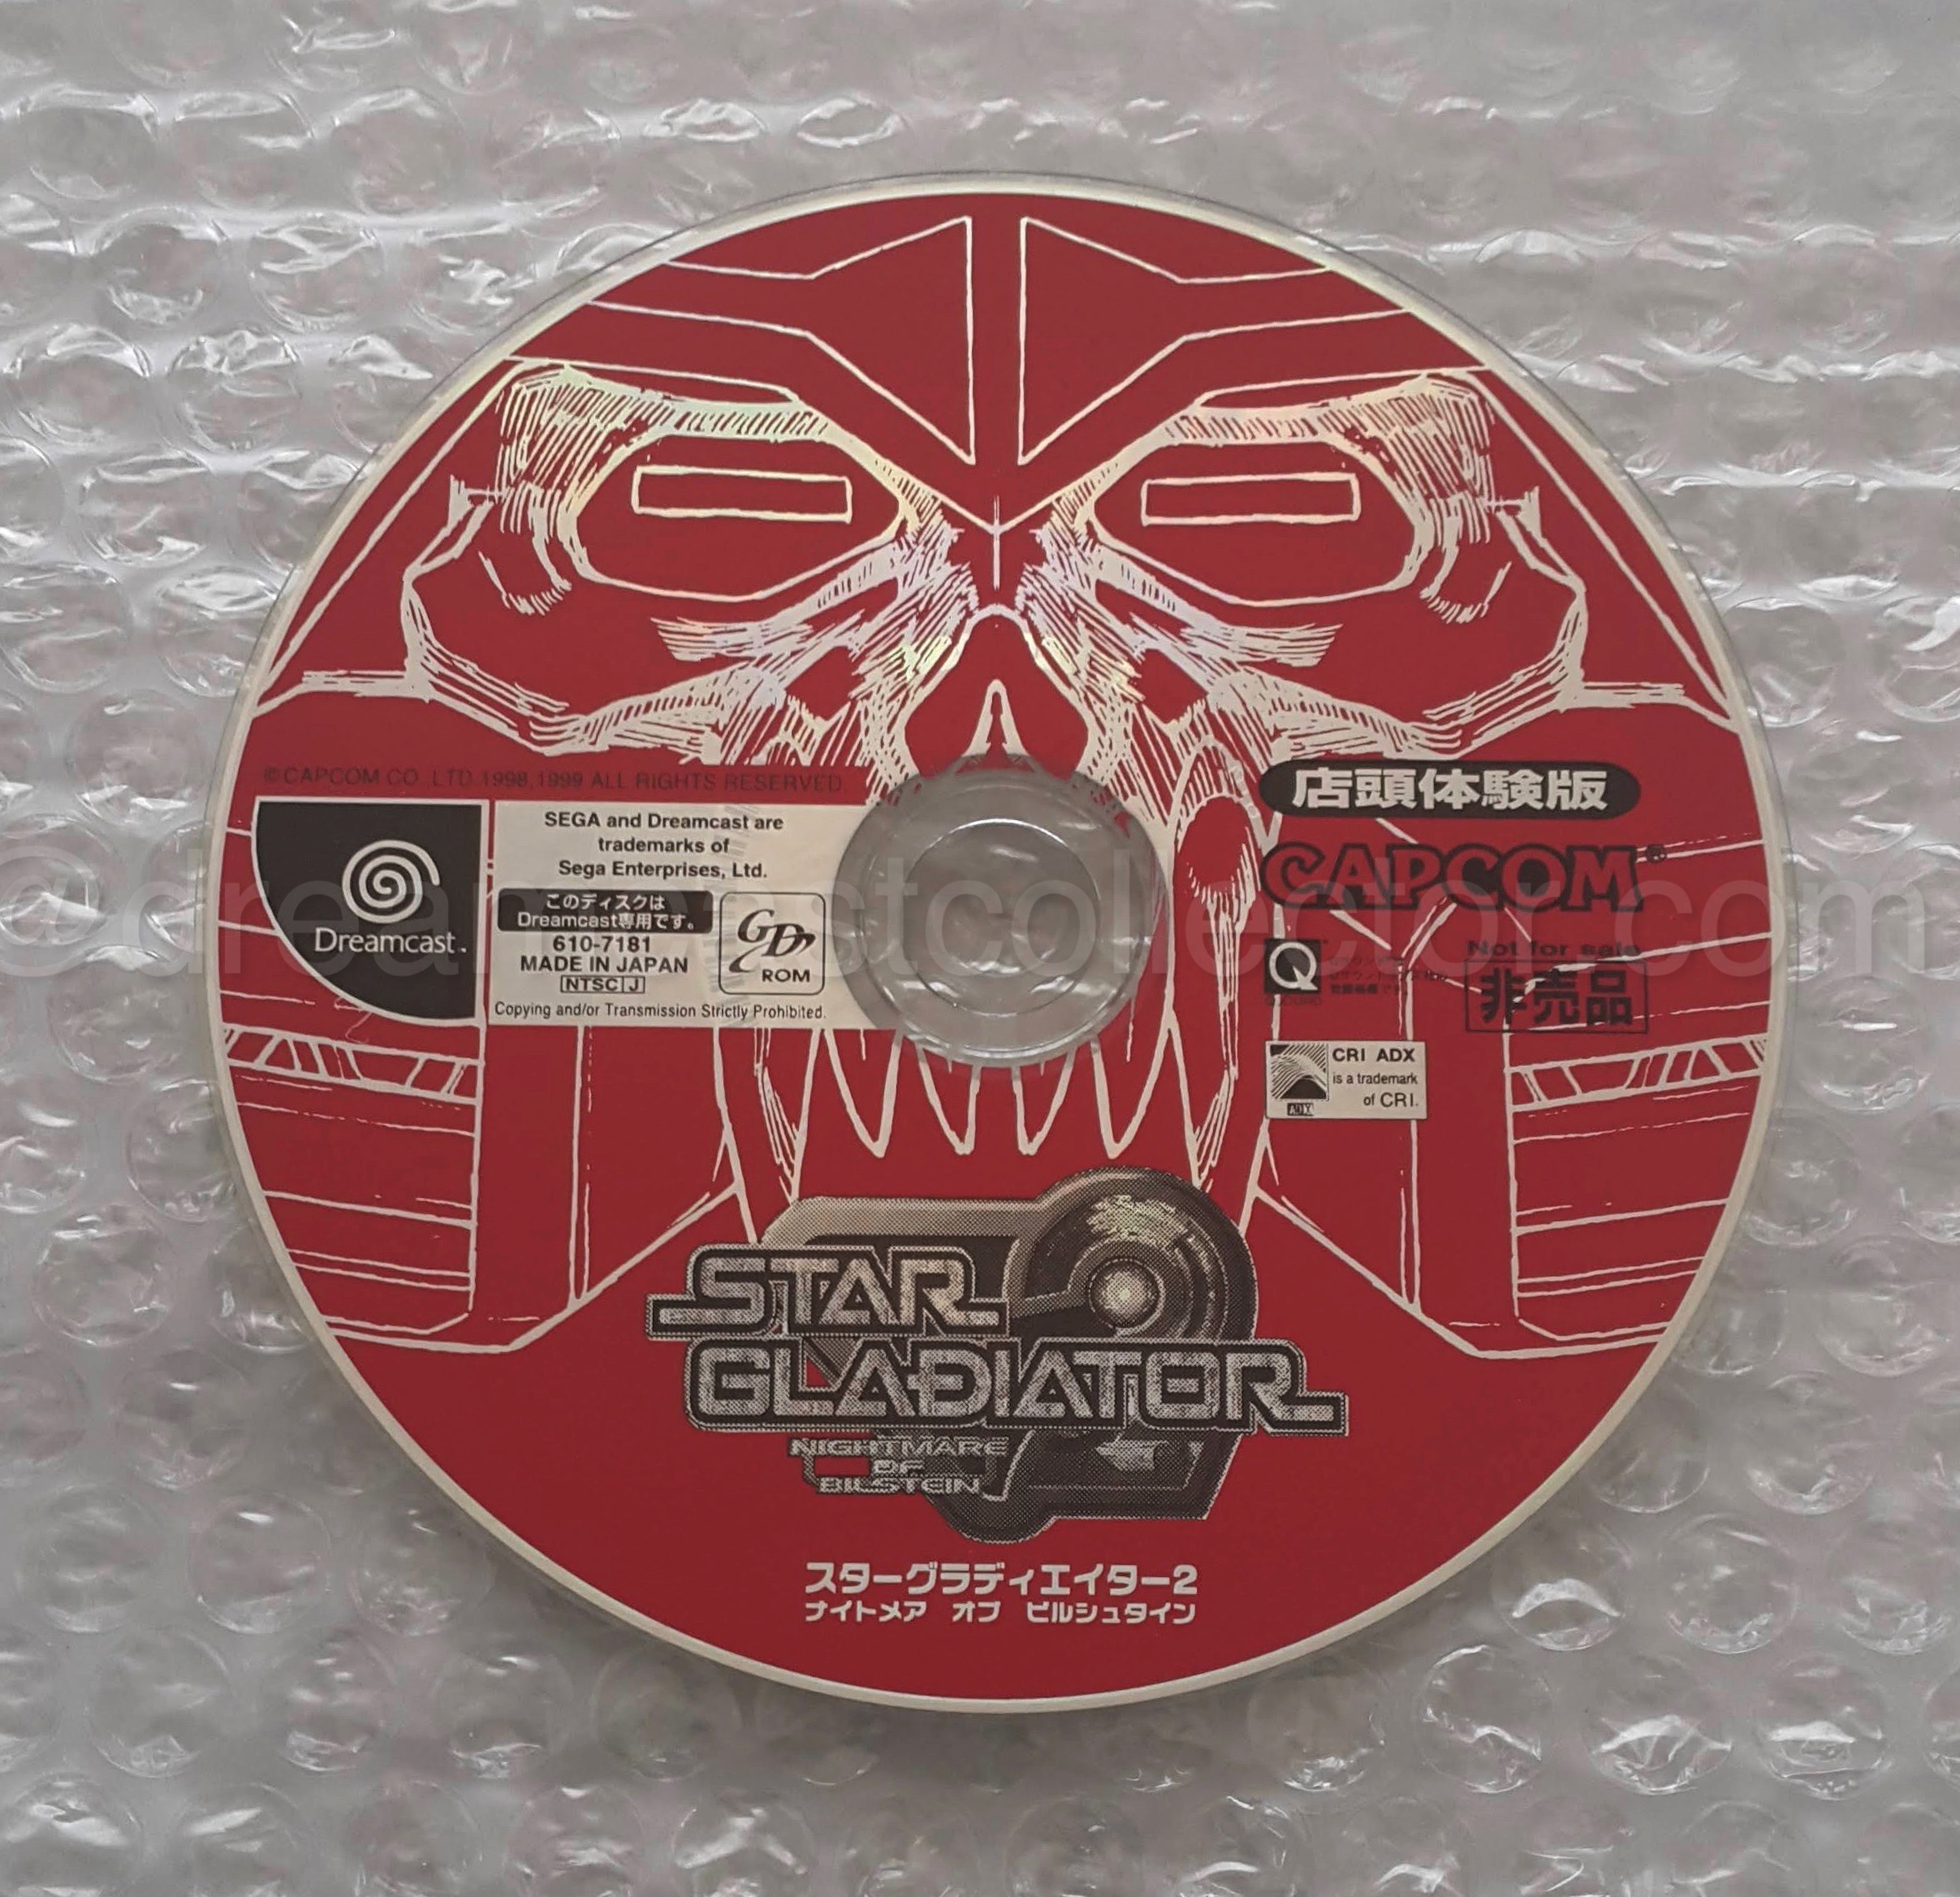 A typical example of a Japanese Not for Sale disc, in this case, Star Gladiator 2. Many of these discs will have variant labels compared to the final retail version but almost all will display the 非売品 designation on the face of the disc or packaging or both.